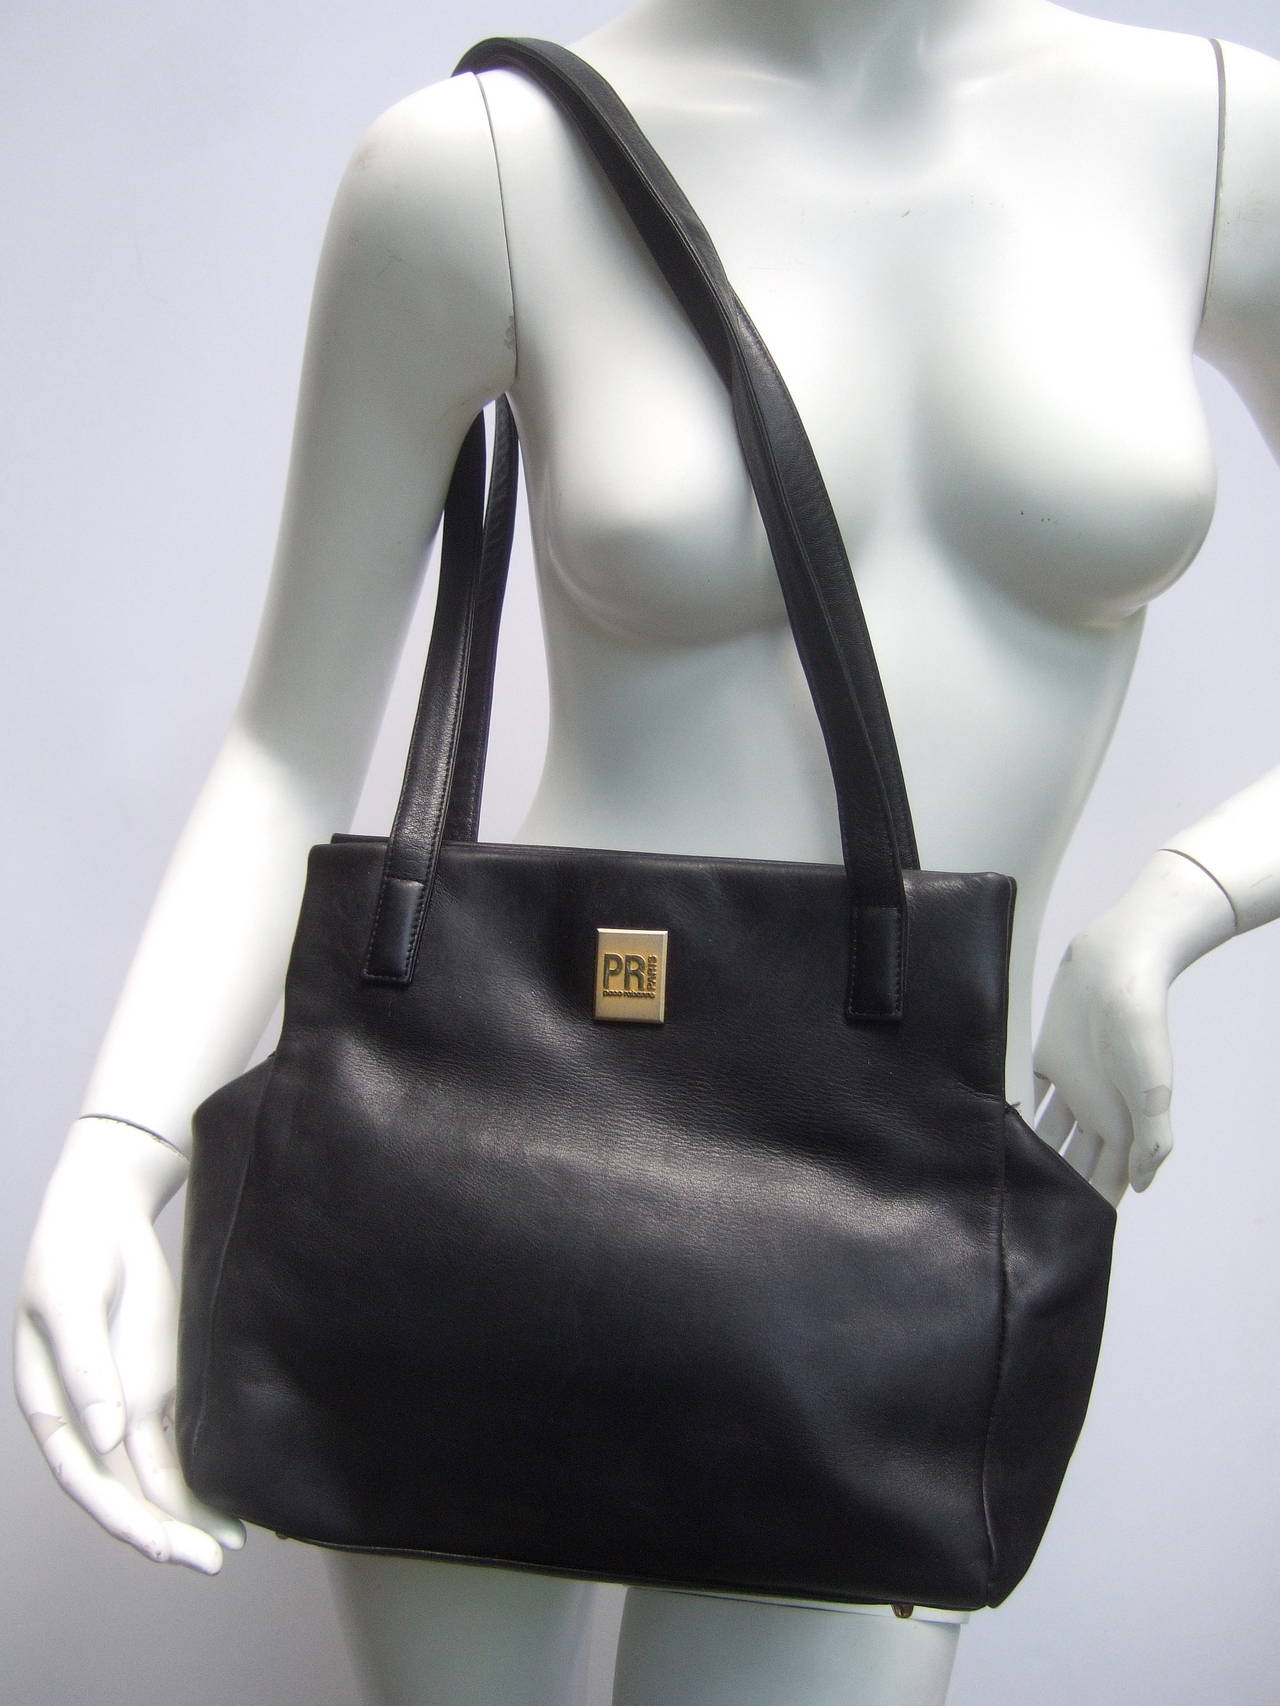 Paco Rabanne Paris Black leather shoulder bag c 1980s
The classic saddle style shoulder bag is covered in supple
black leather. Designed with twin leather shoulder straps
The front exterior is adorned with a gilt metal emblem 
stamped Paco